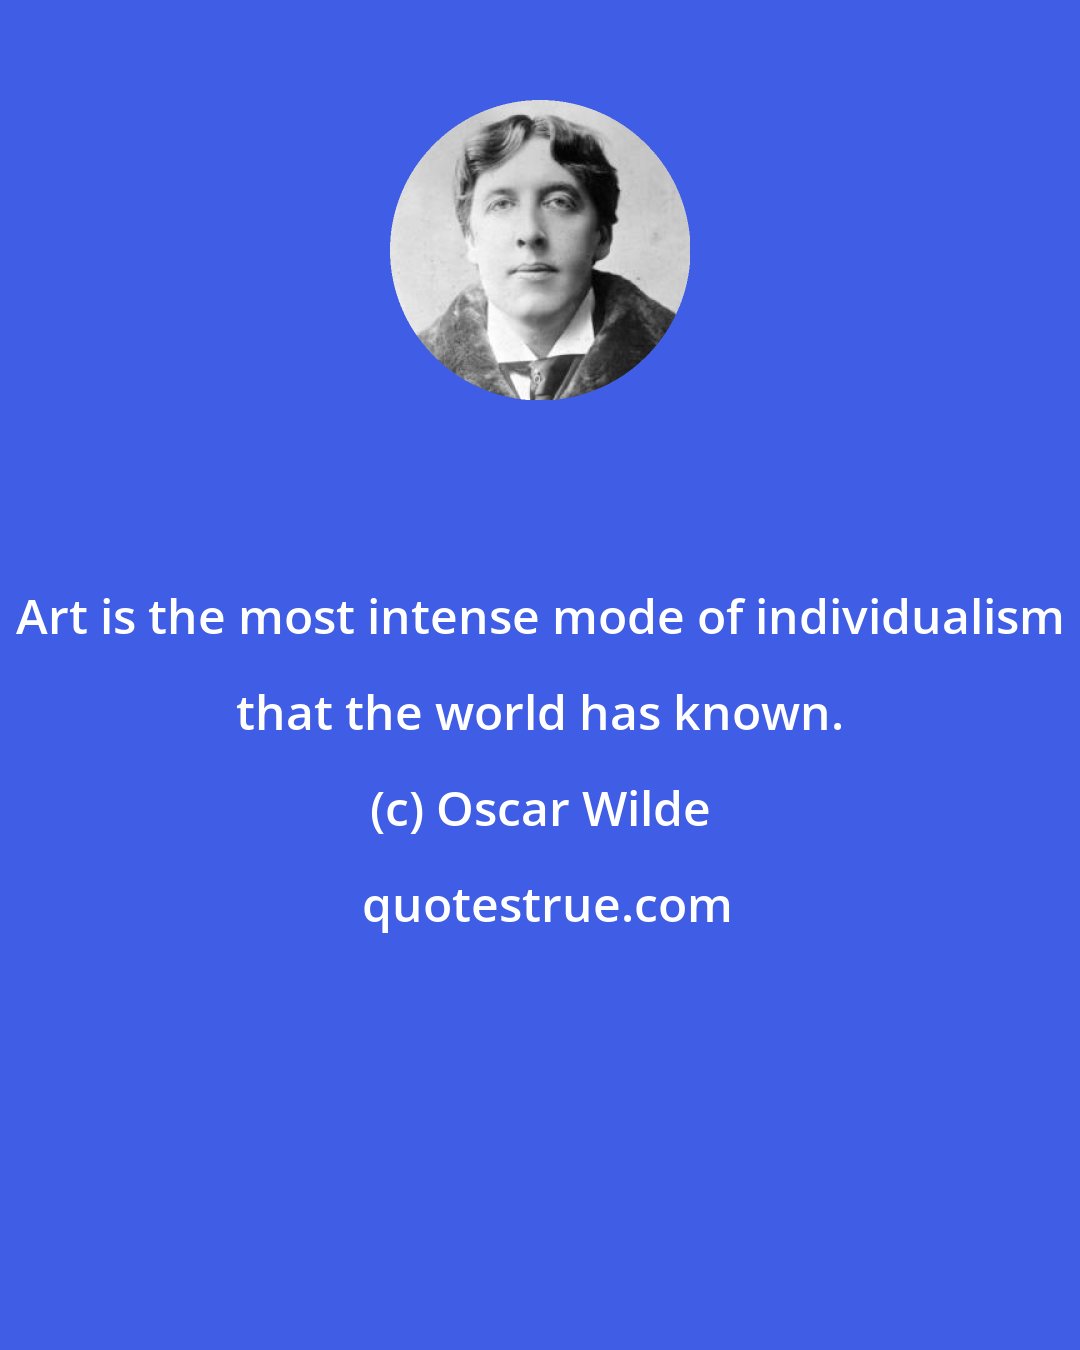 Oscar Wilde: Art is the most intense mode of individualism that the world has known.